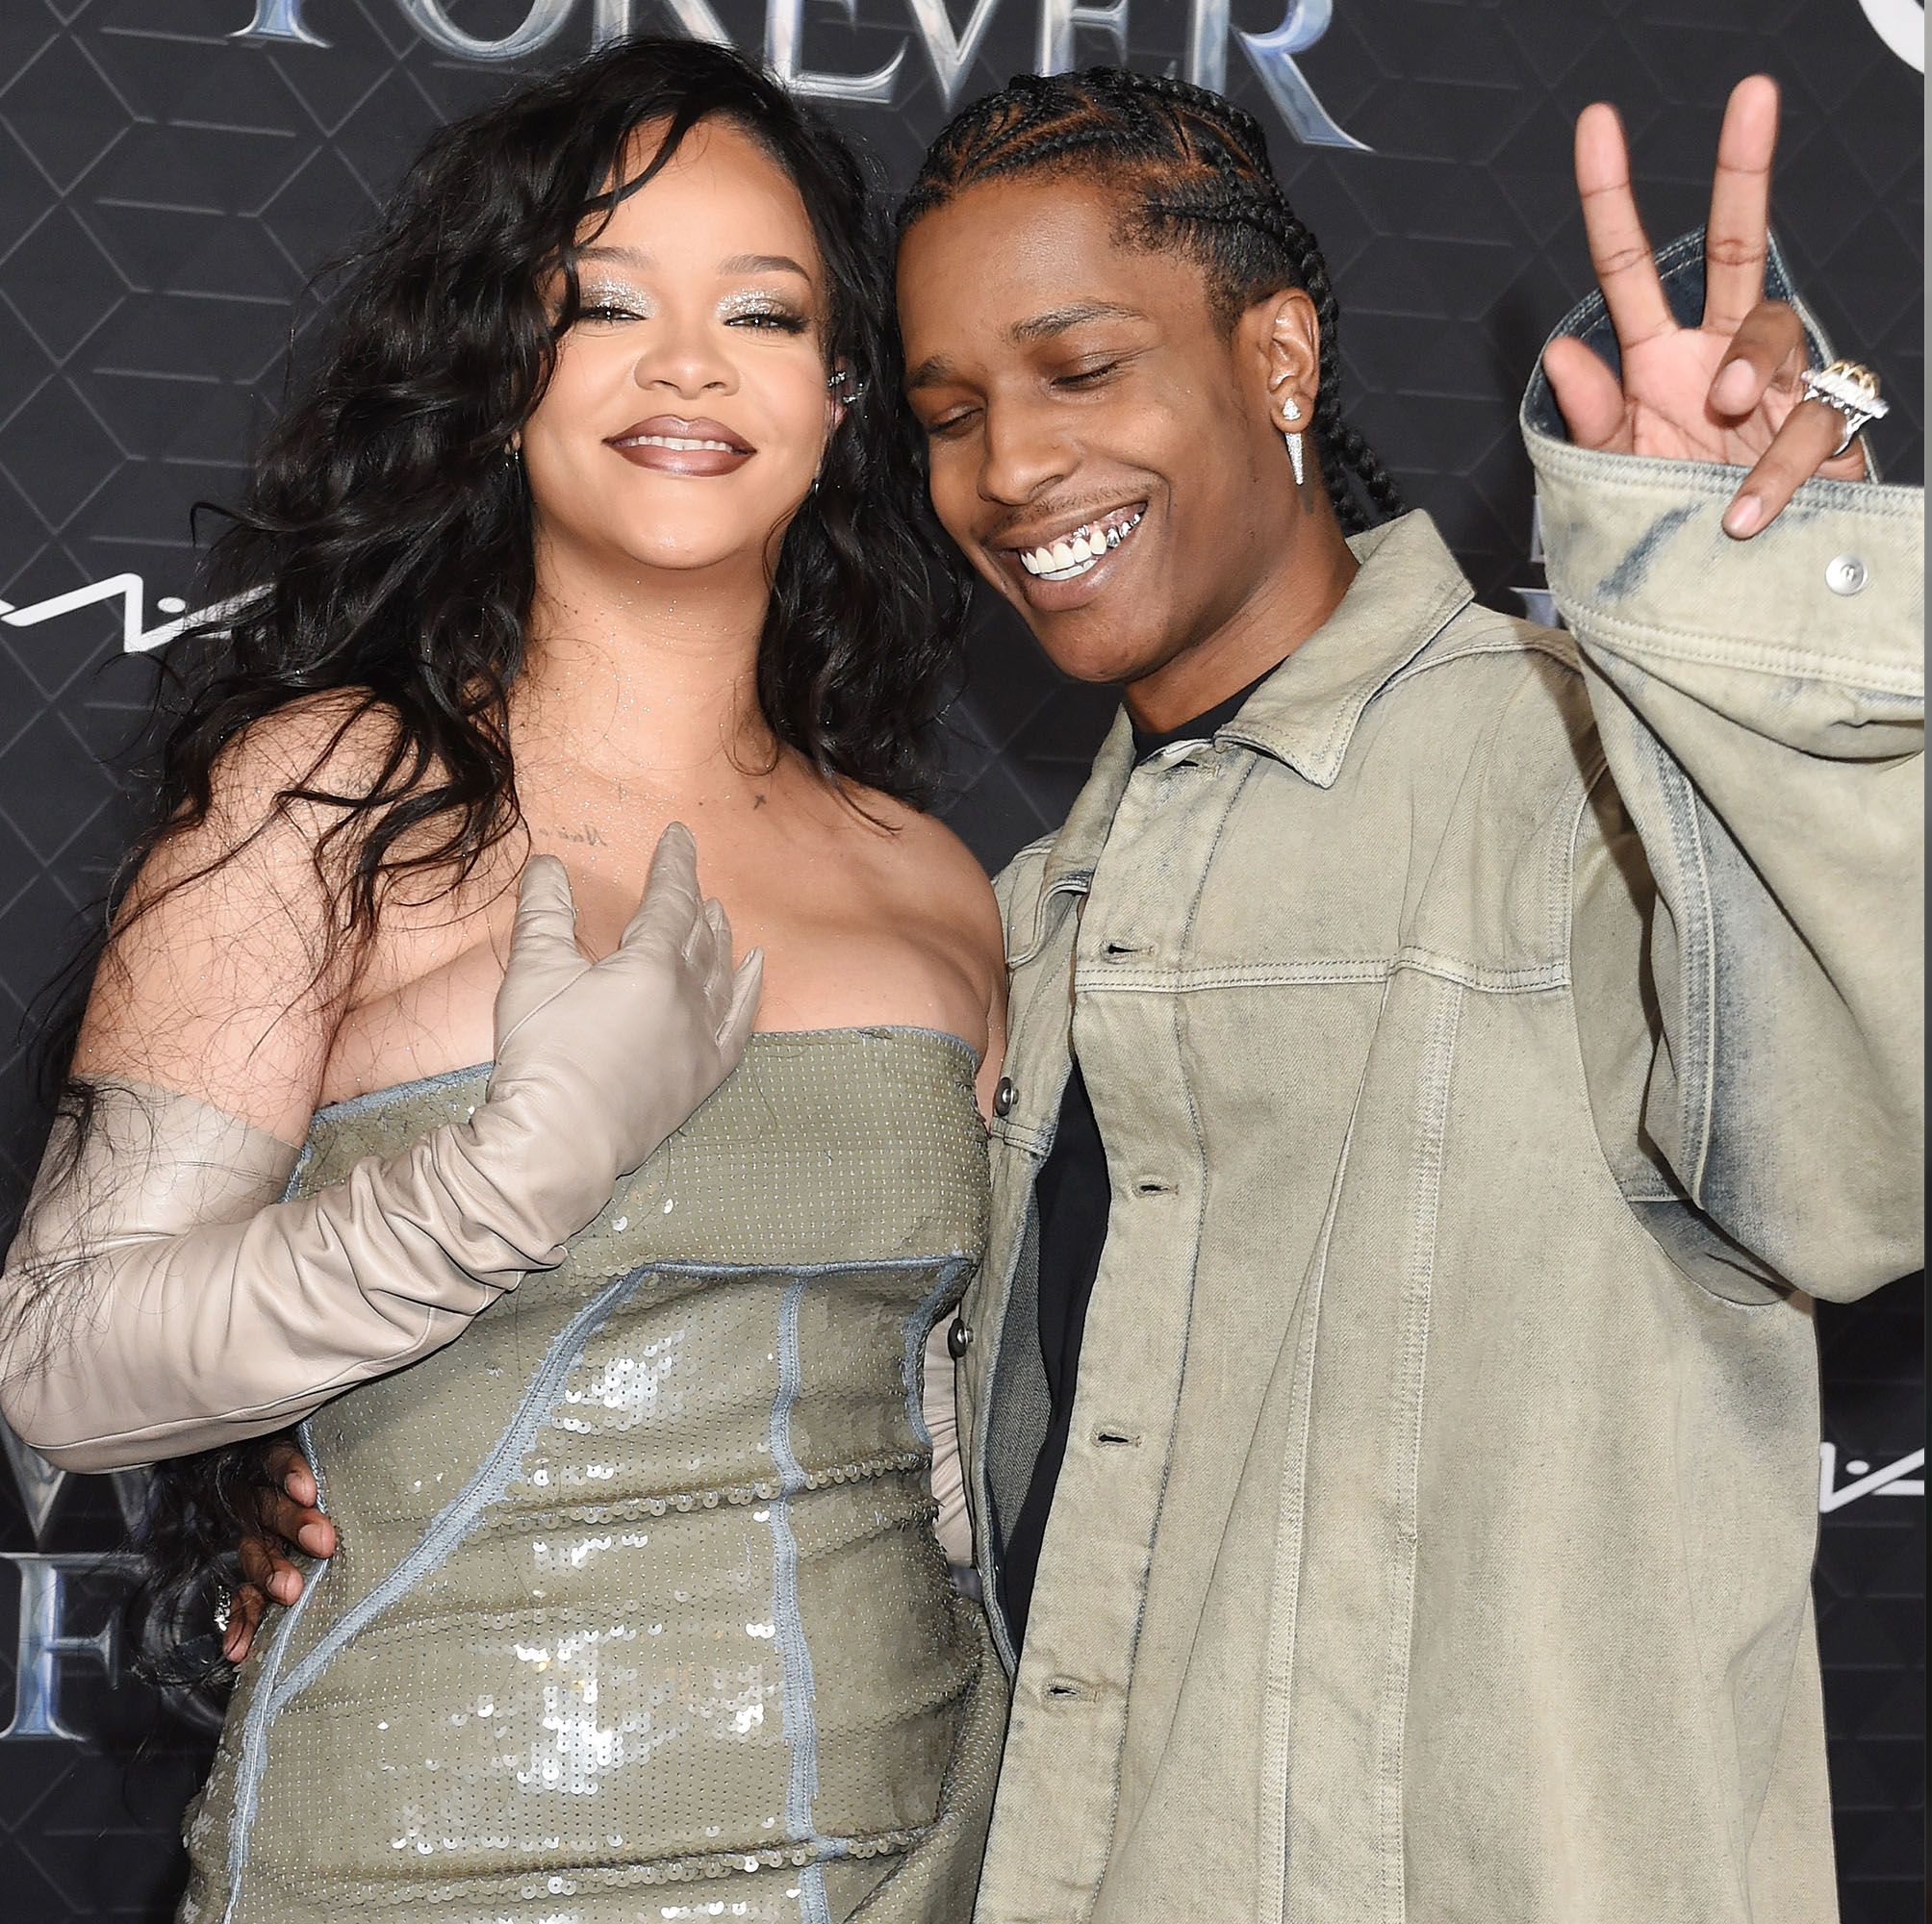 Rihanna's Dad Says She and A$AP Rocky Have Already Gone Through a 